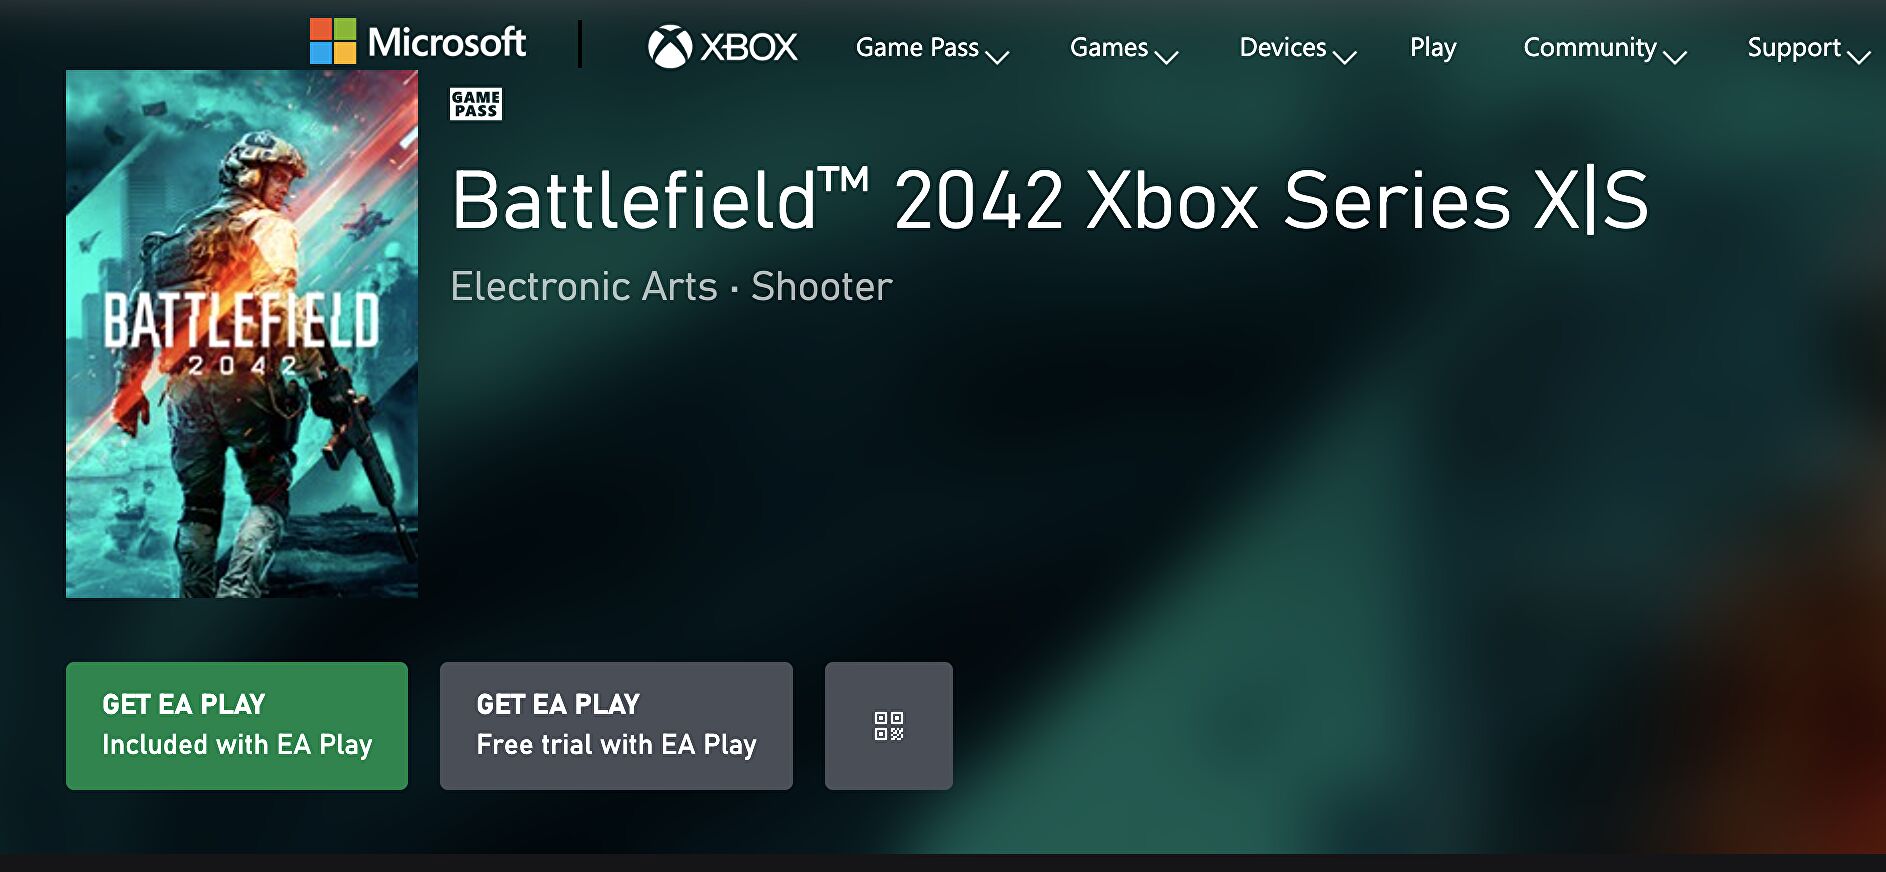 Xbox Game Pass mention Battlefield 2042